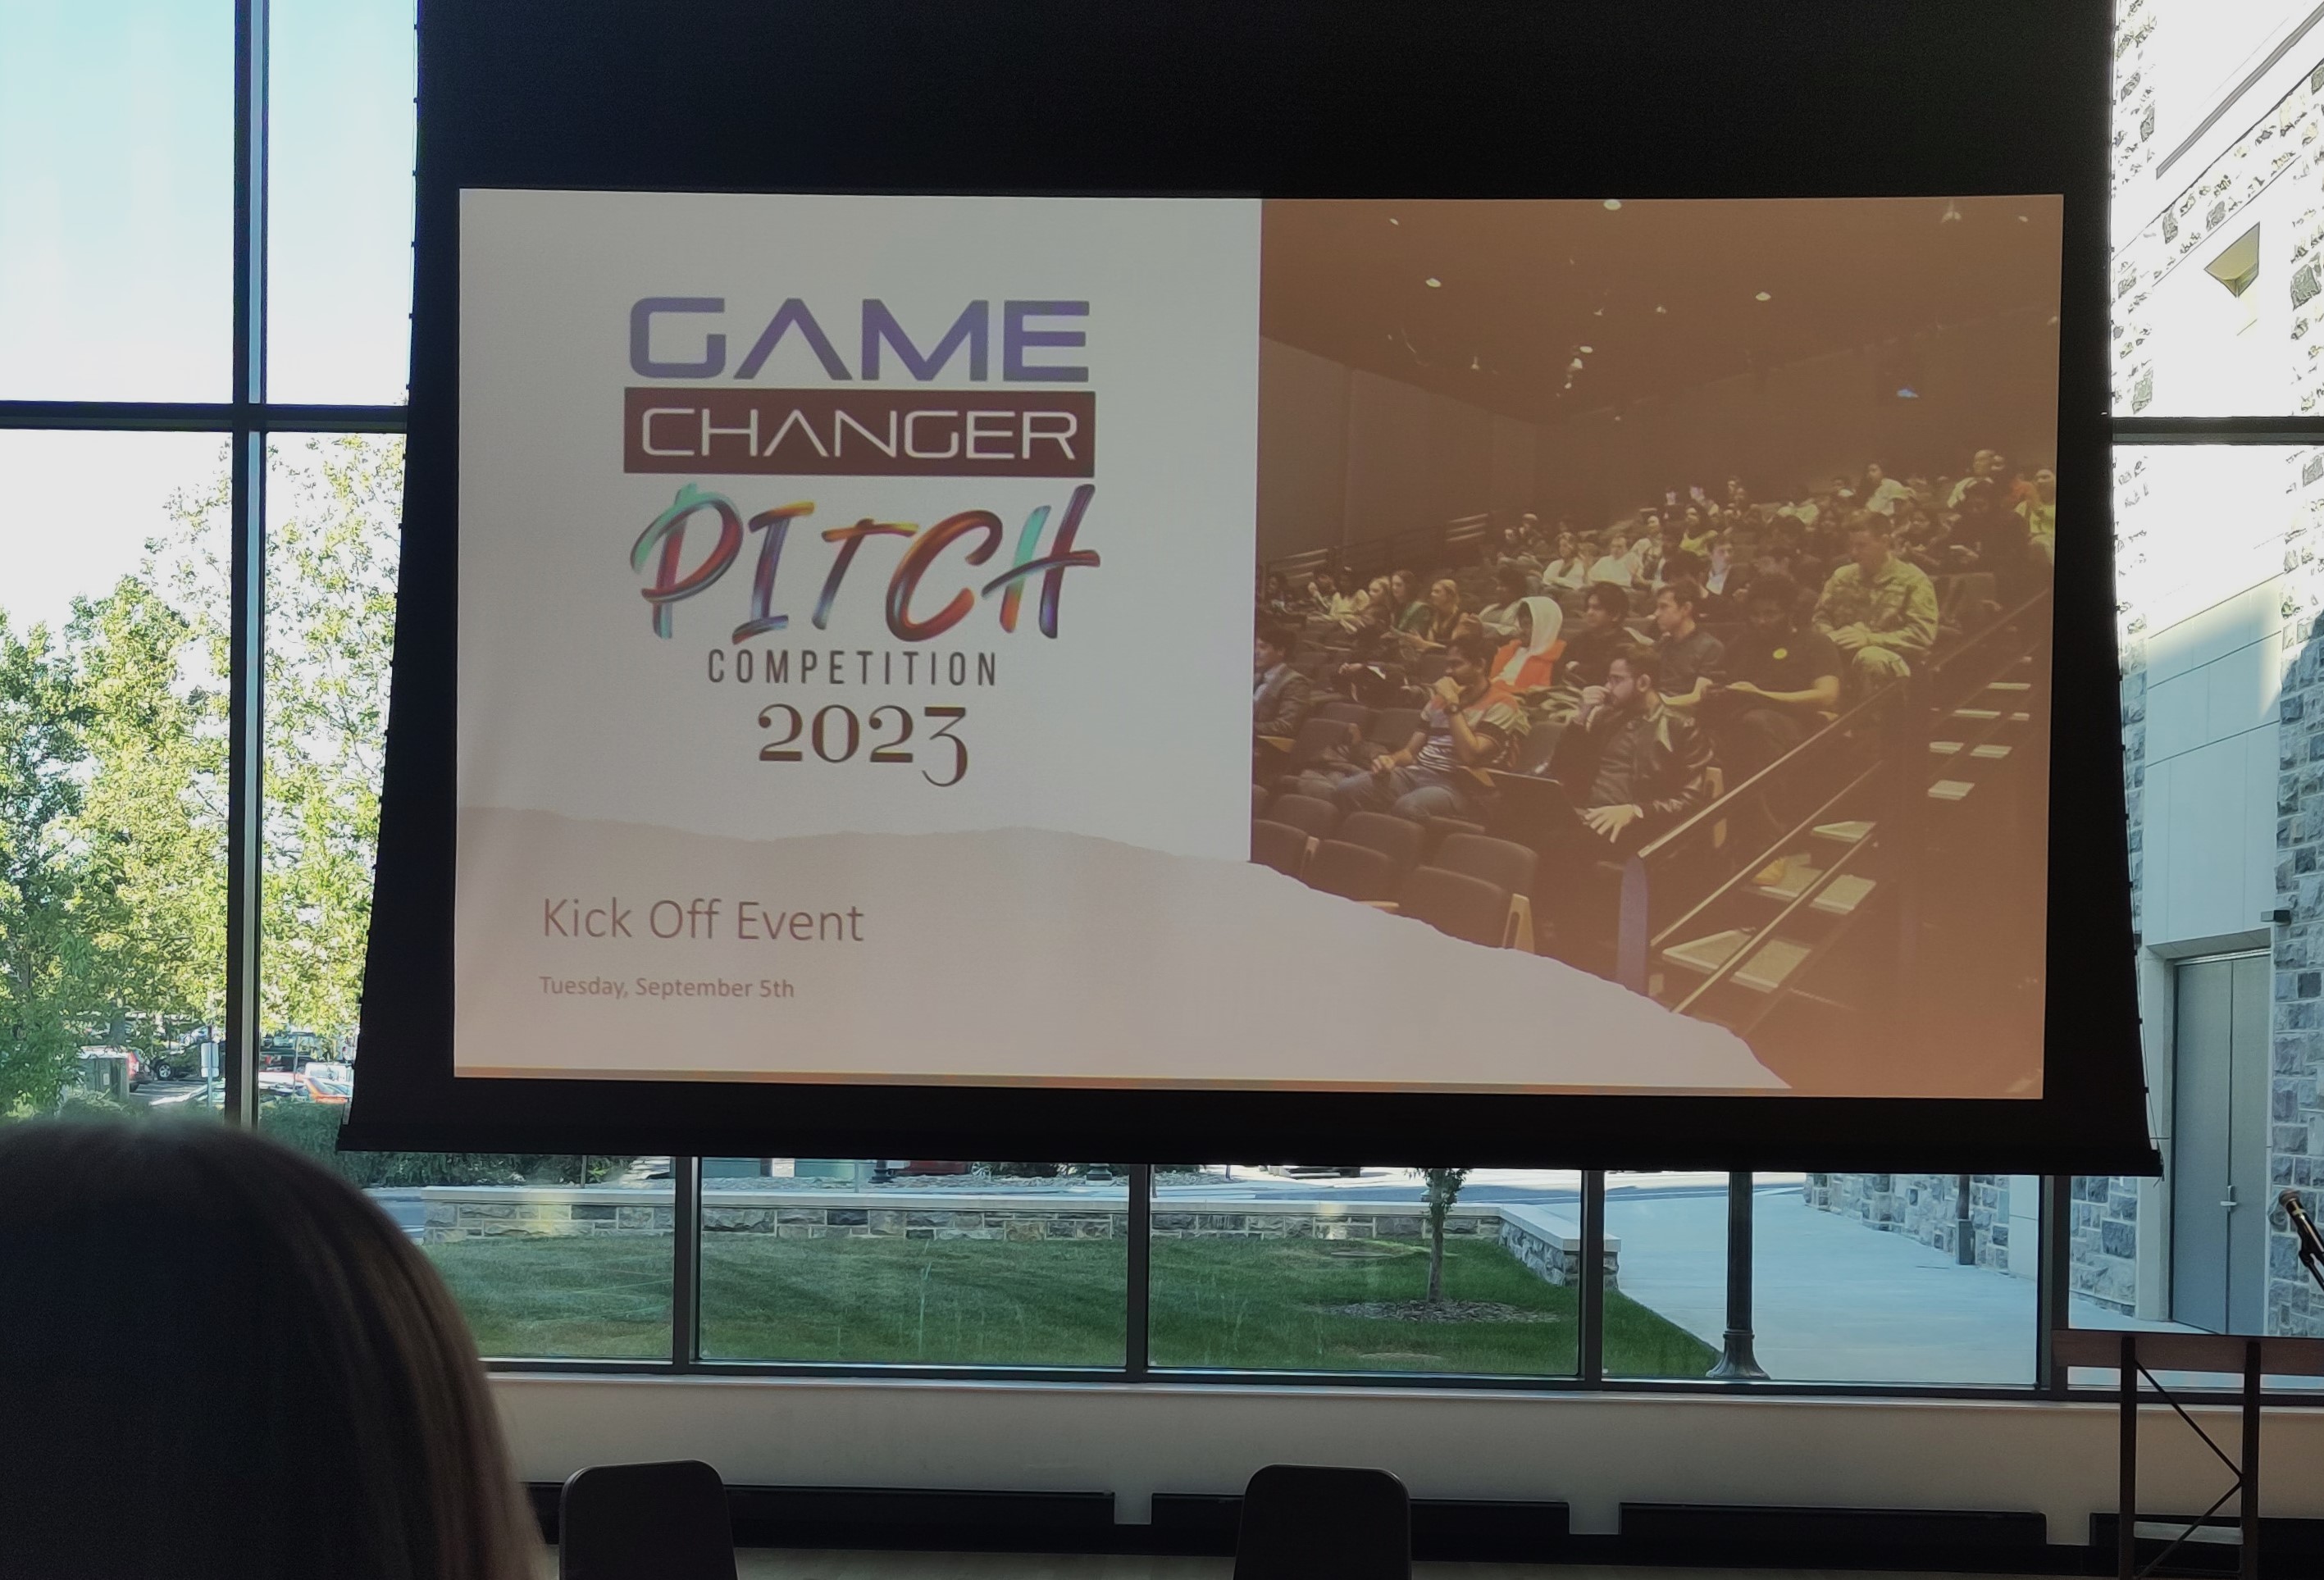 Game Changer Pitch competition at CID.